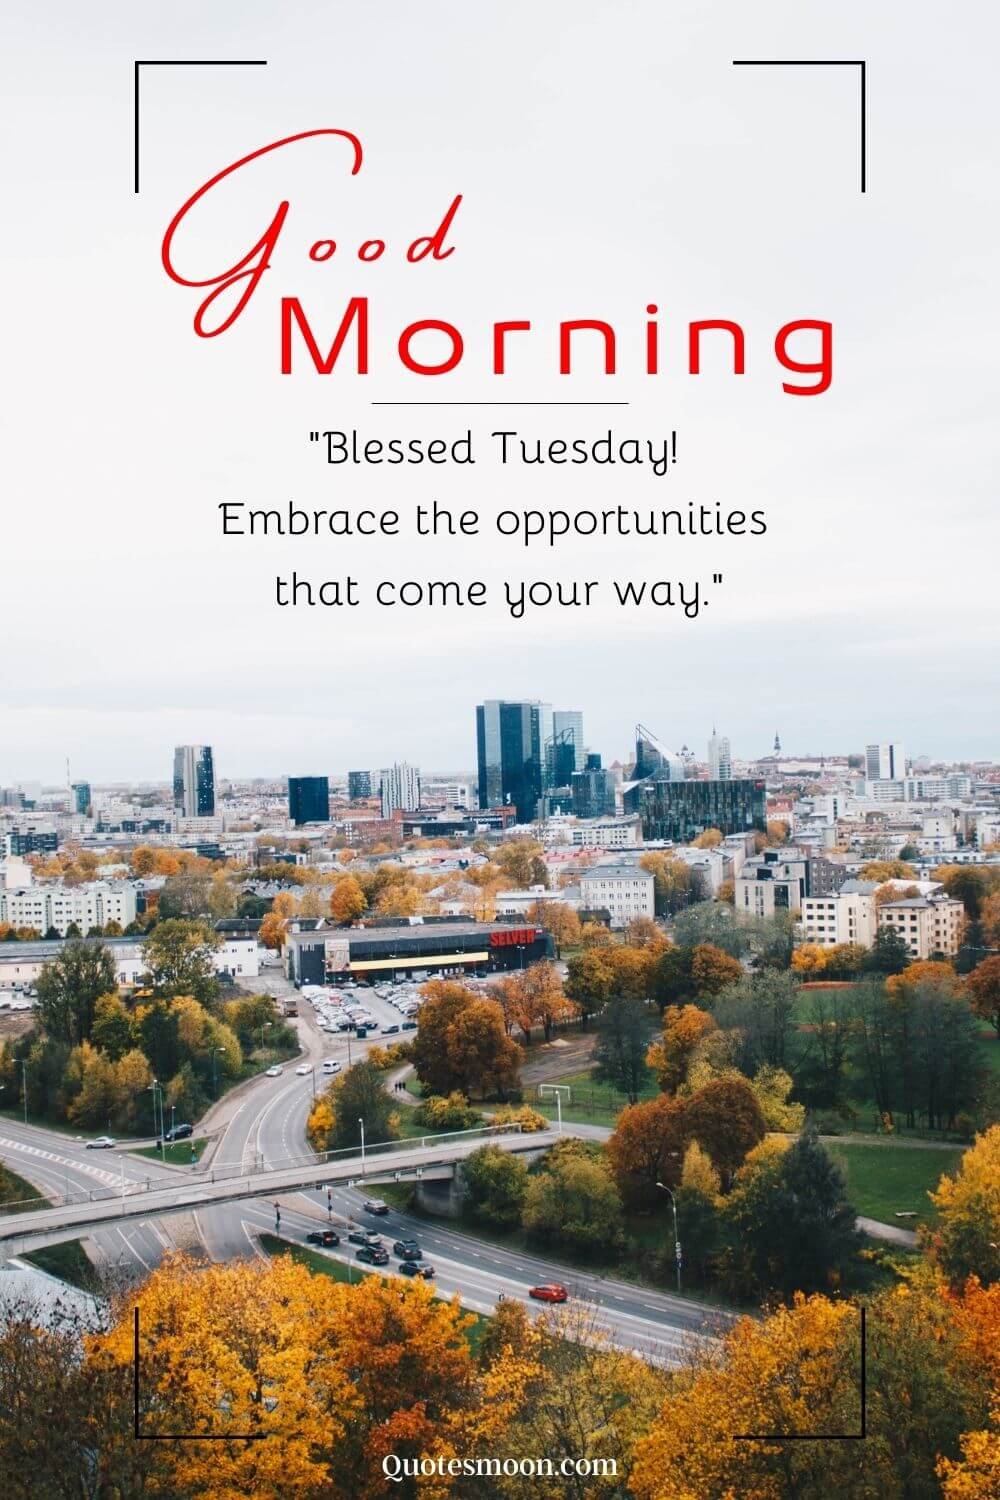 tuesday spring morning season wishes images